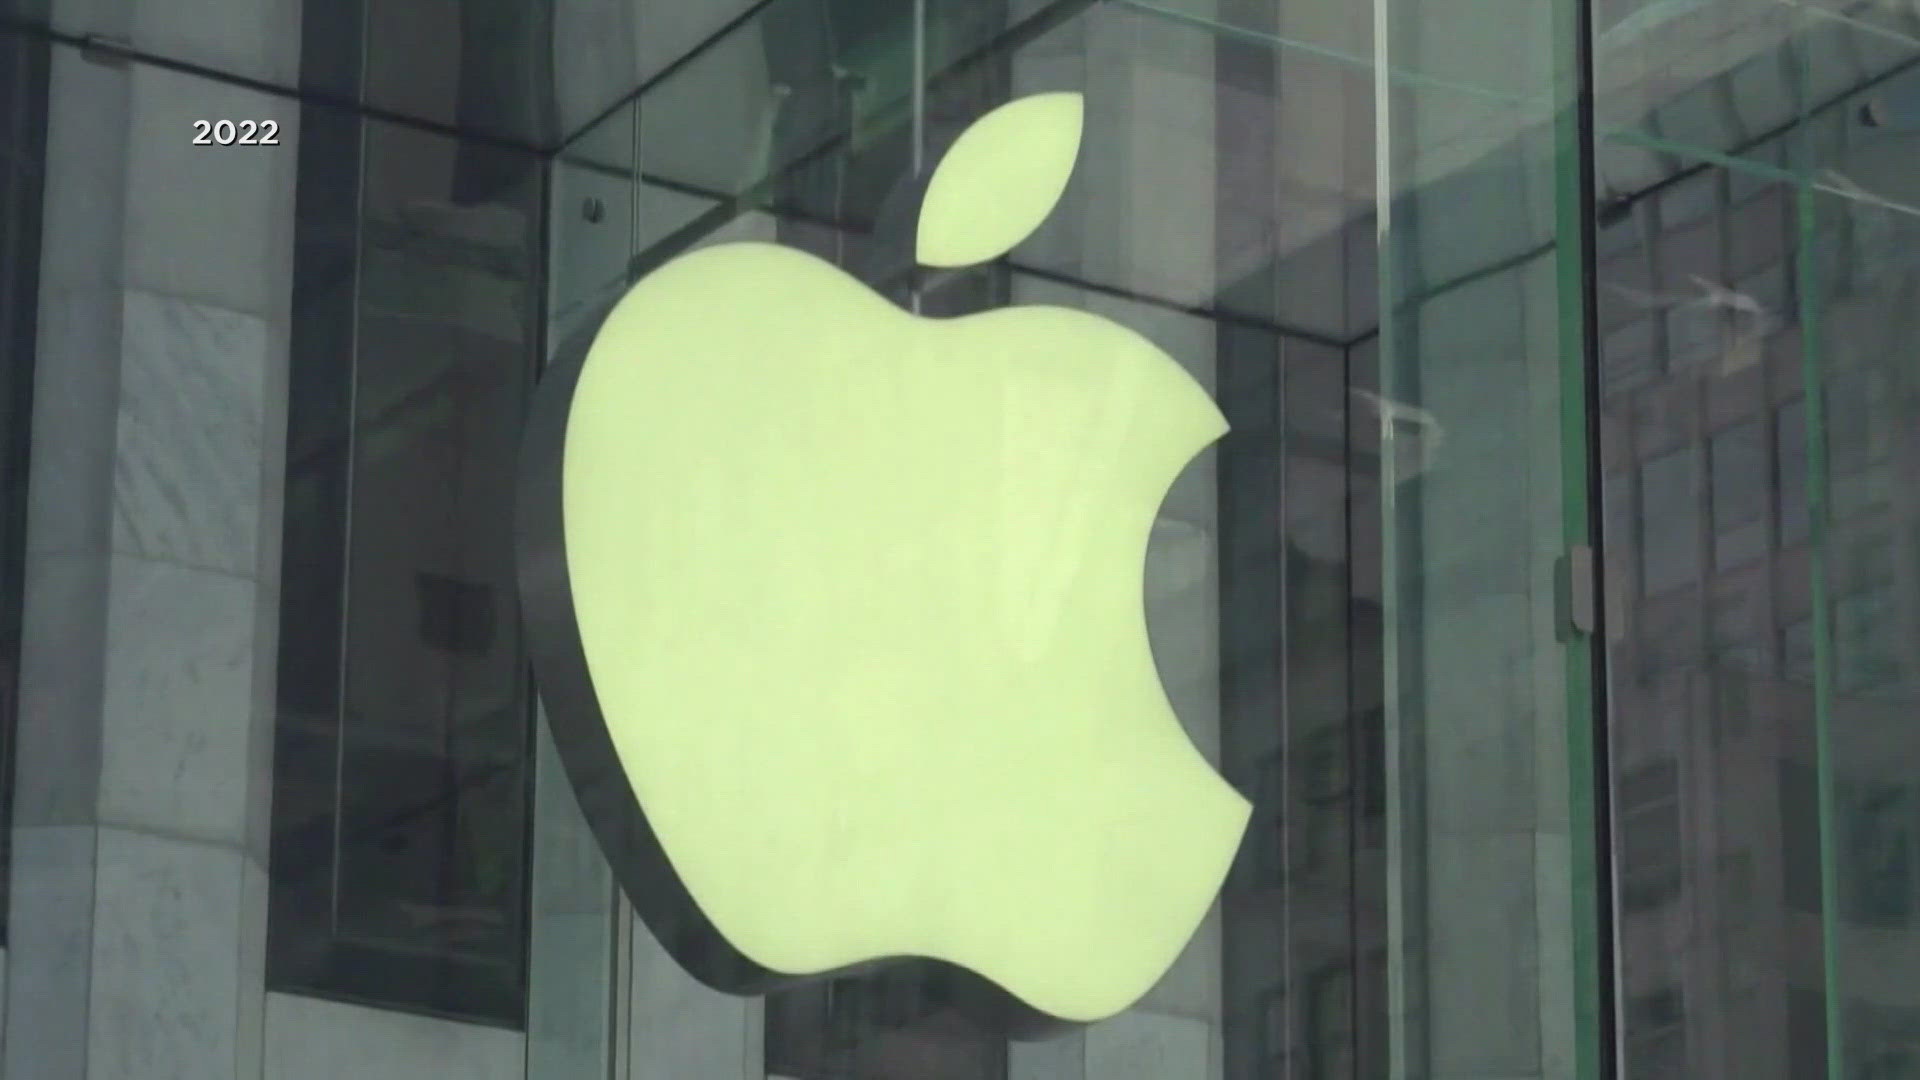 EMPLOYEES AT AN APPLE STORE IN TOWSON, MARYLAND, HAVE VOTED TO AUTHORIZE A STRIKE. THE UNION SAYS EMPLOYEES ARE CONCERNED OVER WORK-LIFE BALANCE AND WAGES.